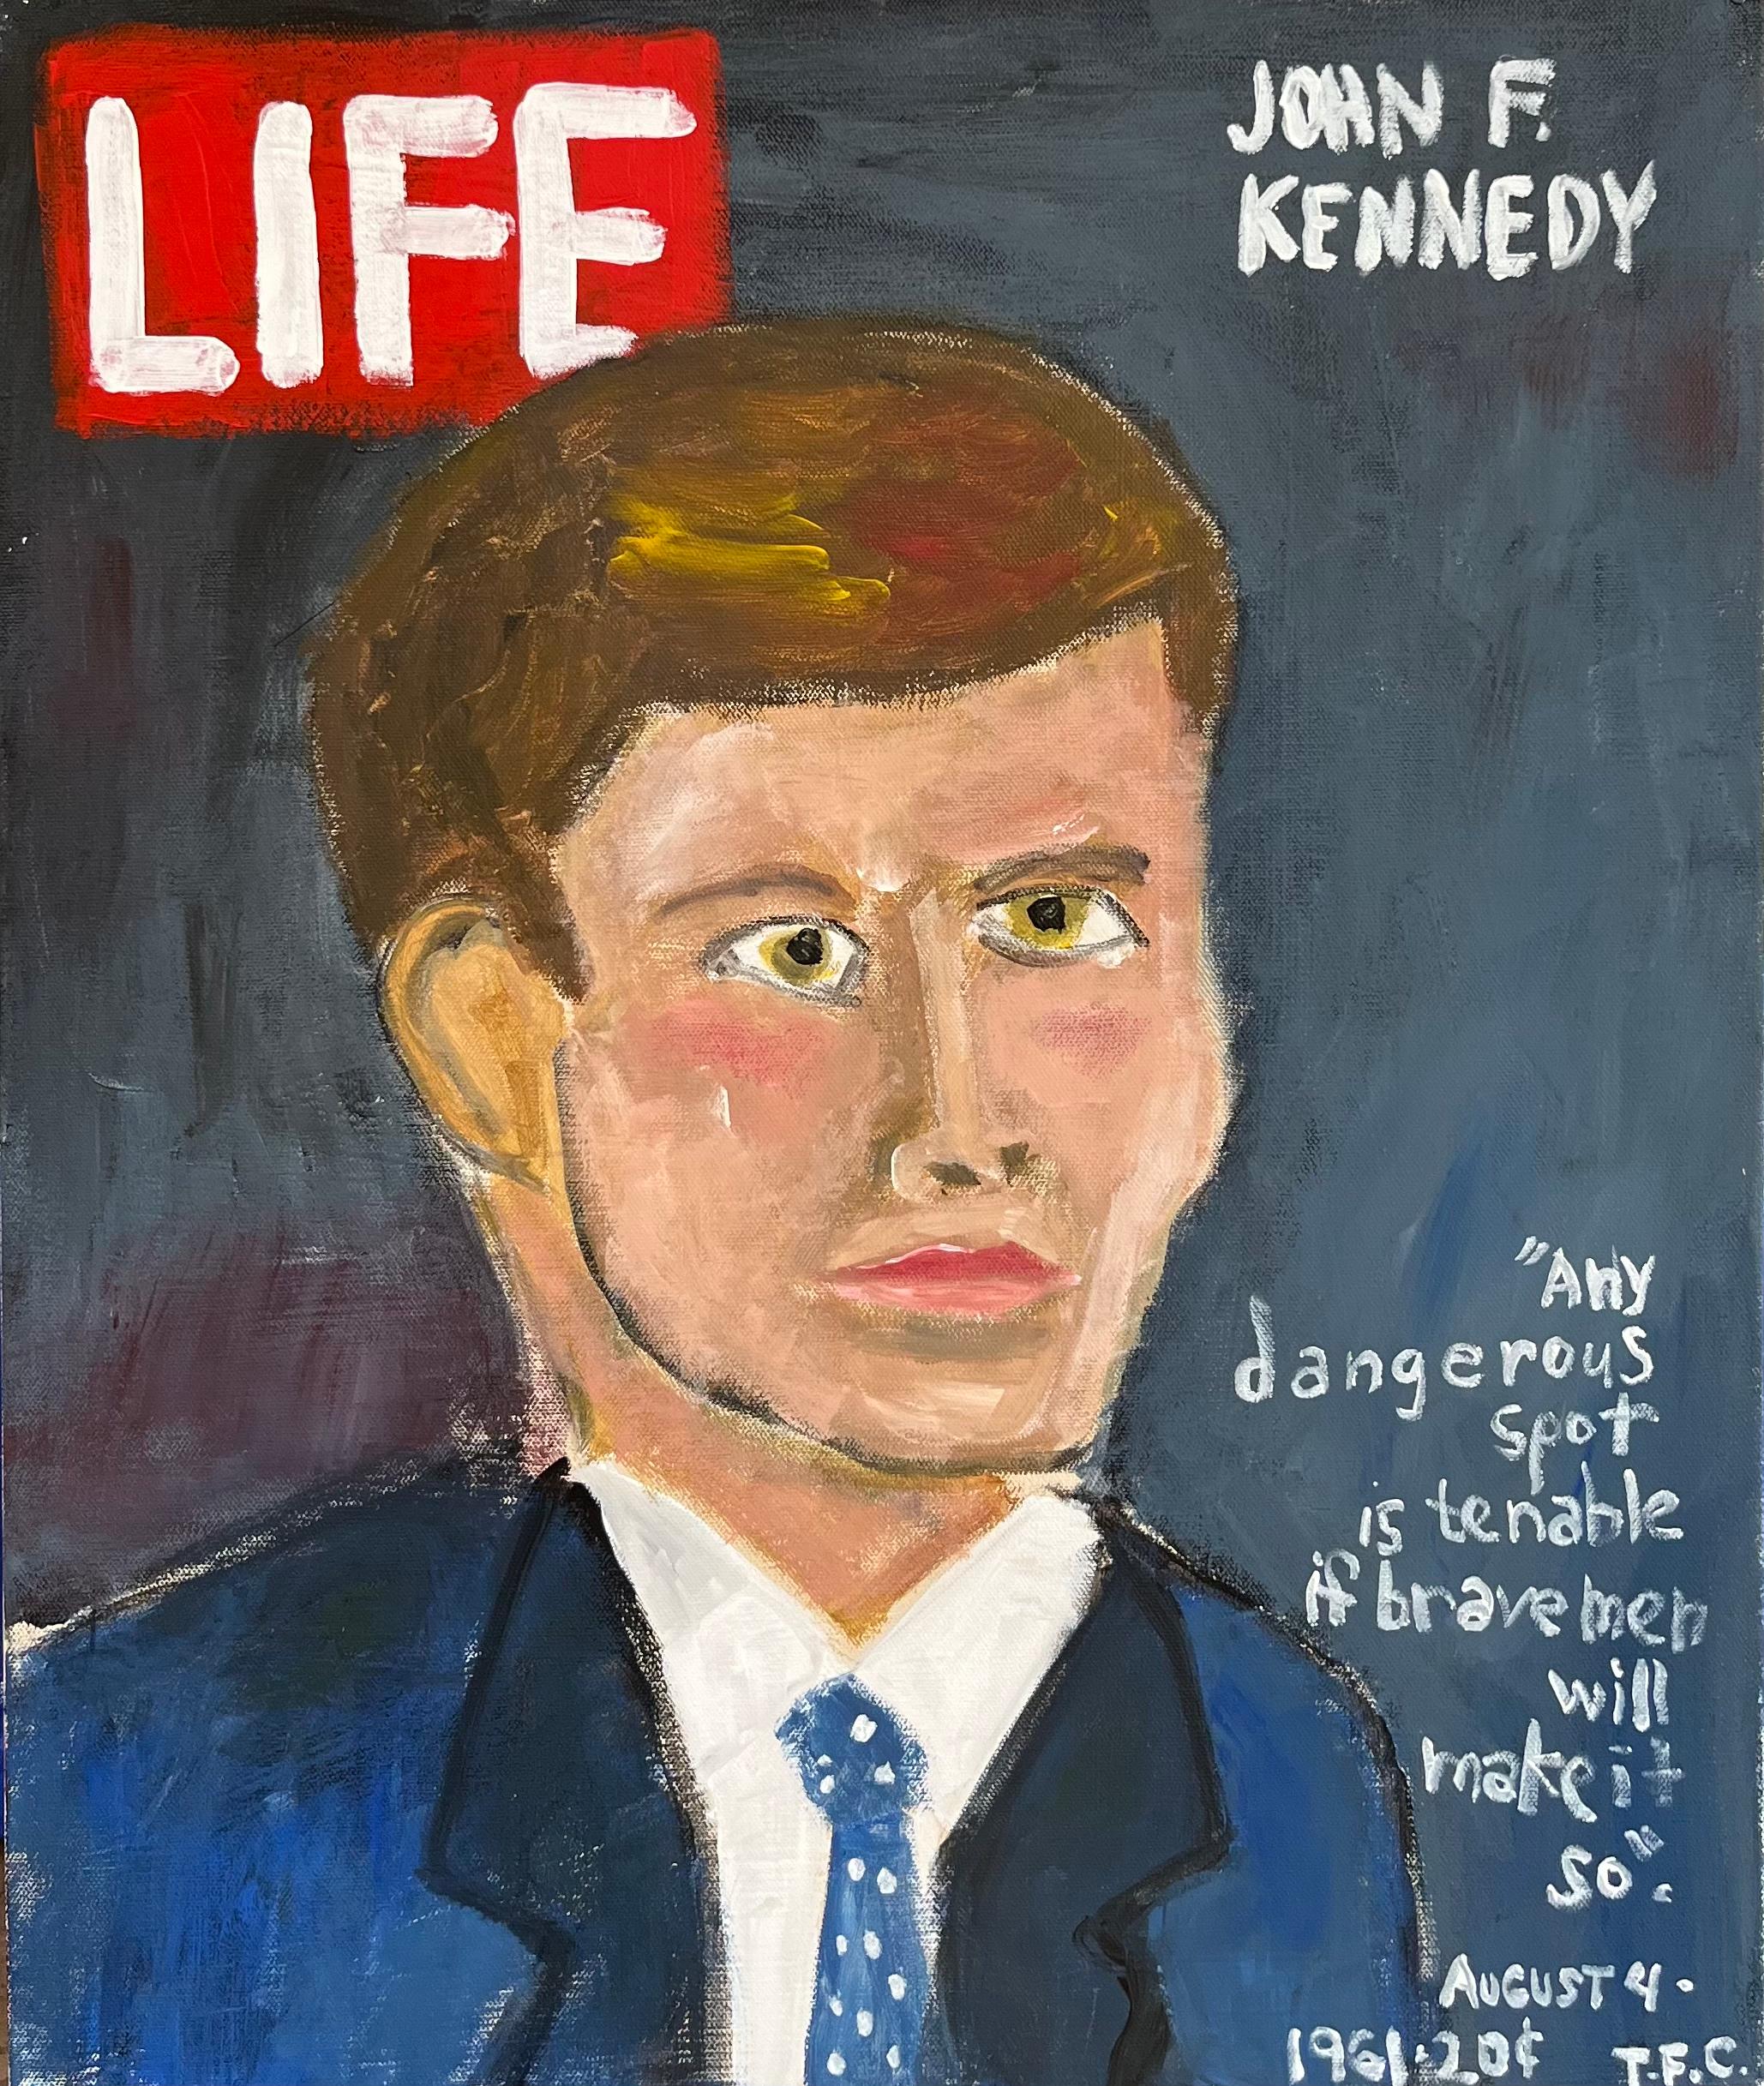 Tyler Casey Abstract Painting - "John F. Kennedy- Life" Contemporary Abstract Pop Art Magazine Cover Painting